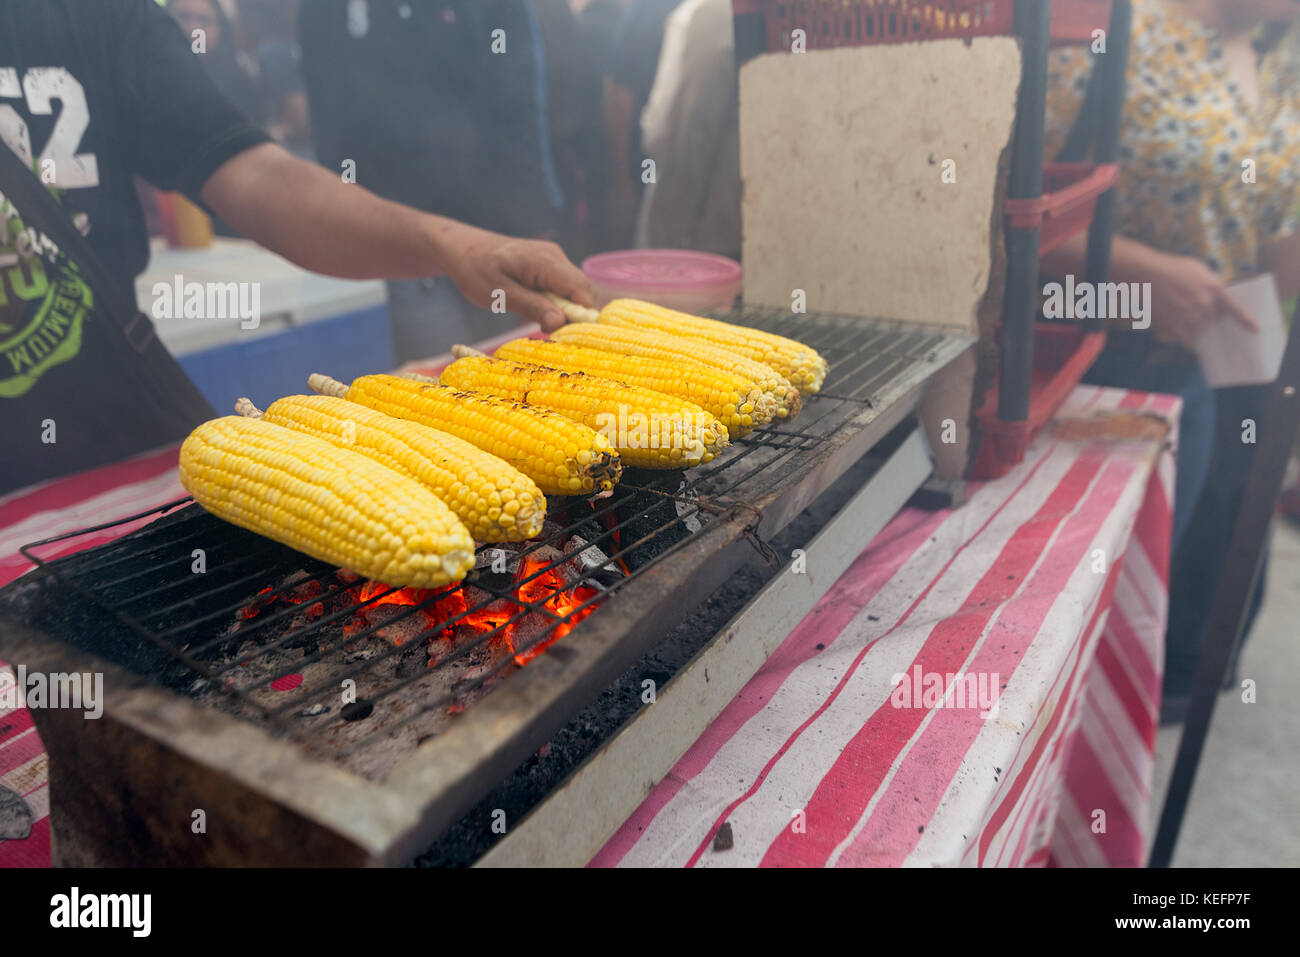 Corn on the cob cooking over a charcoal grill on an asian street food stall. Stock Photo